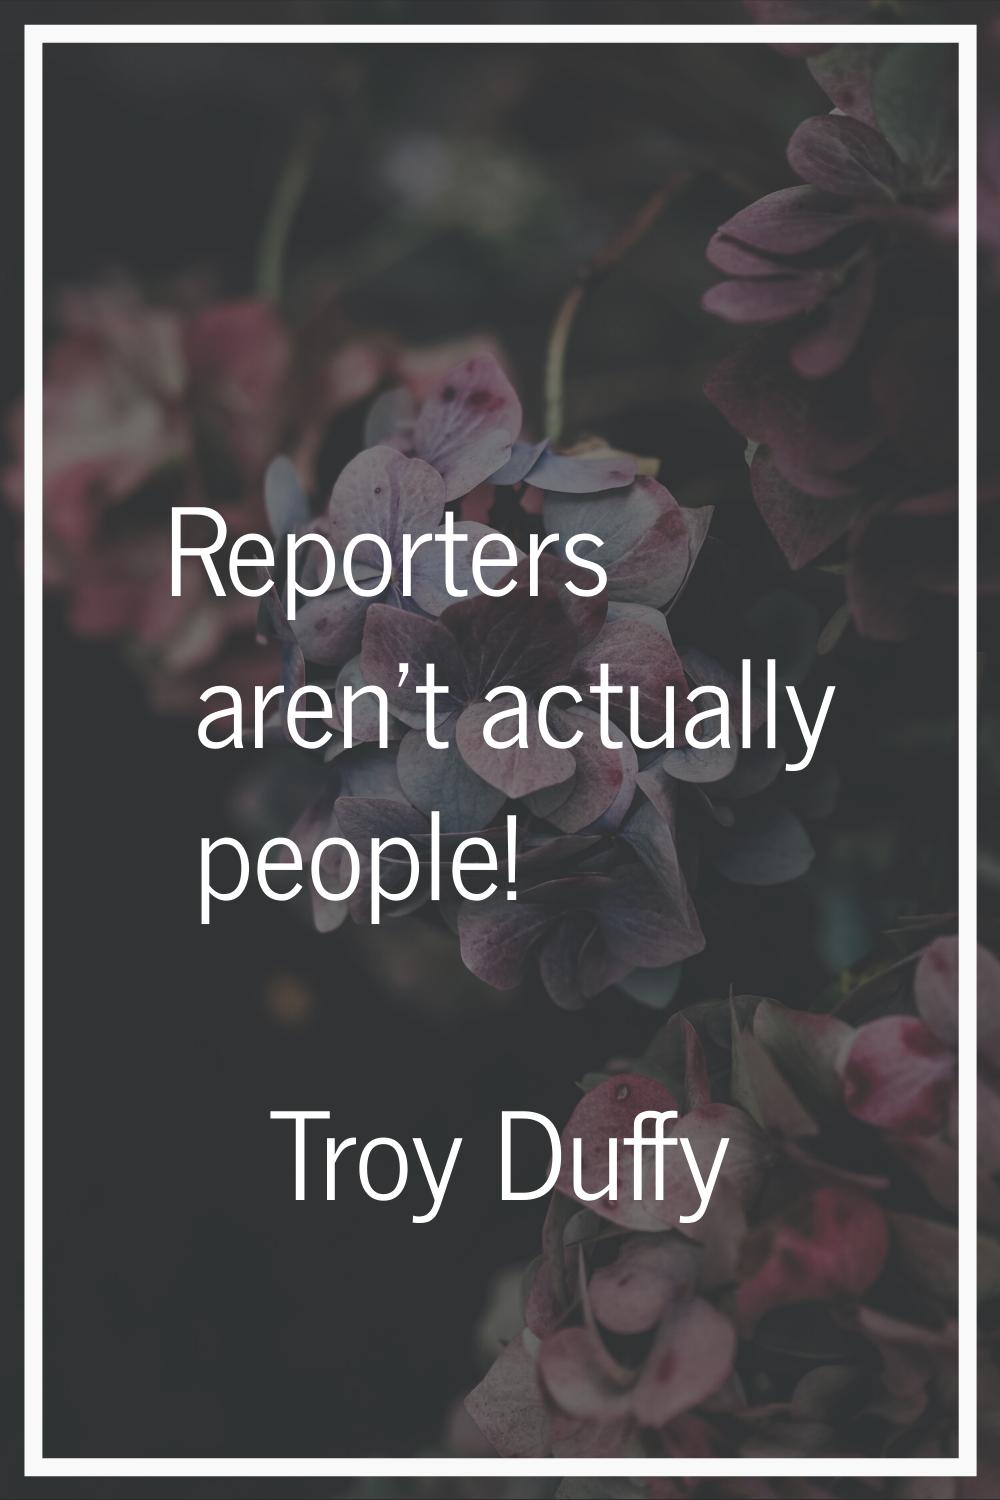 Reporters aren't actually people!